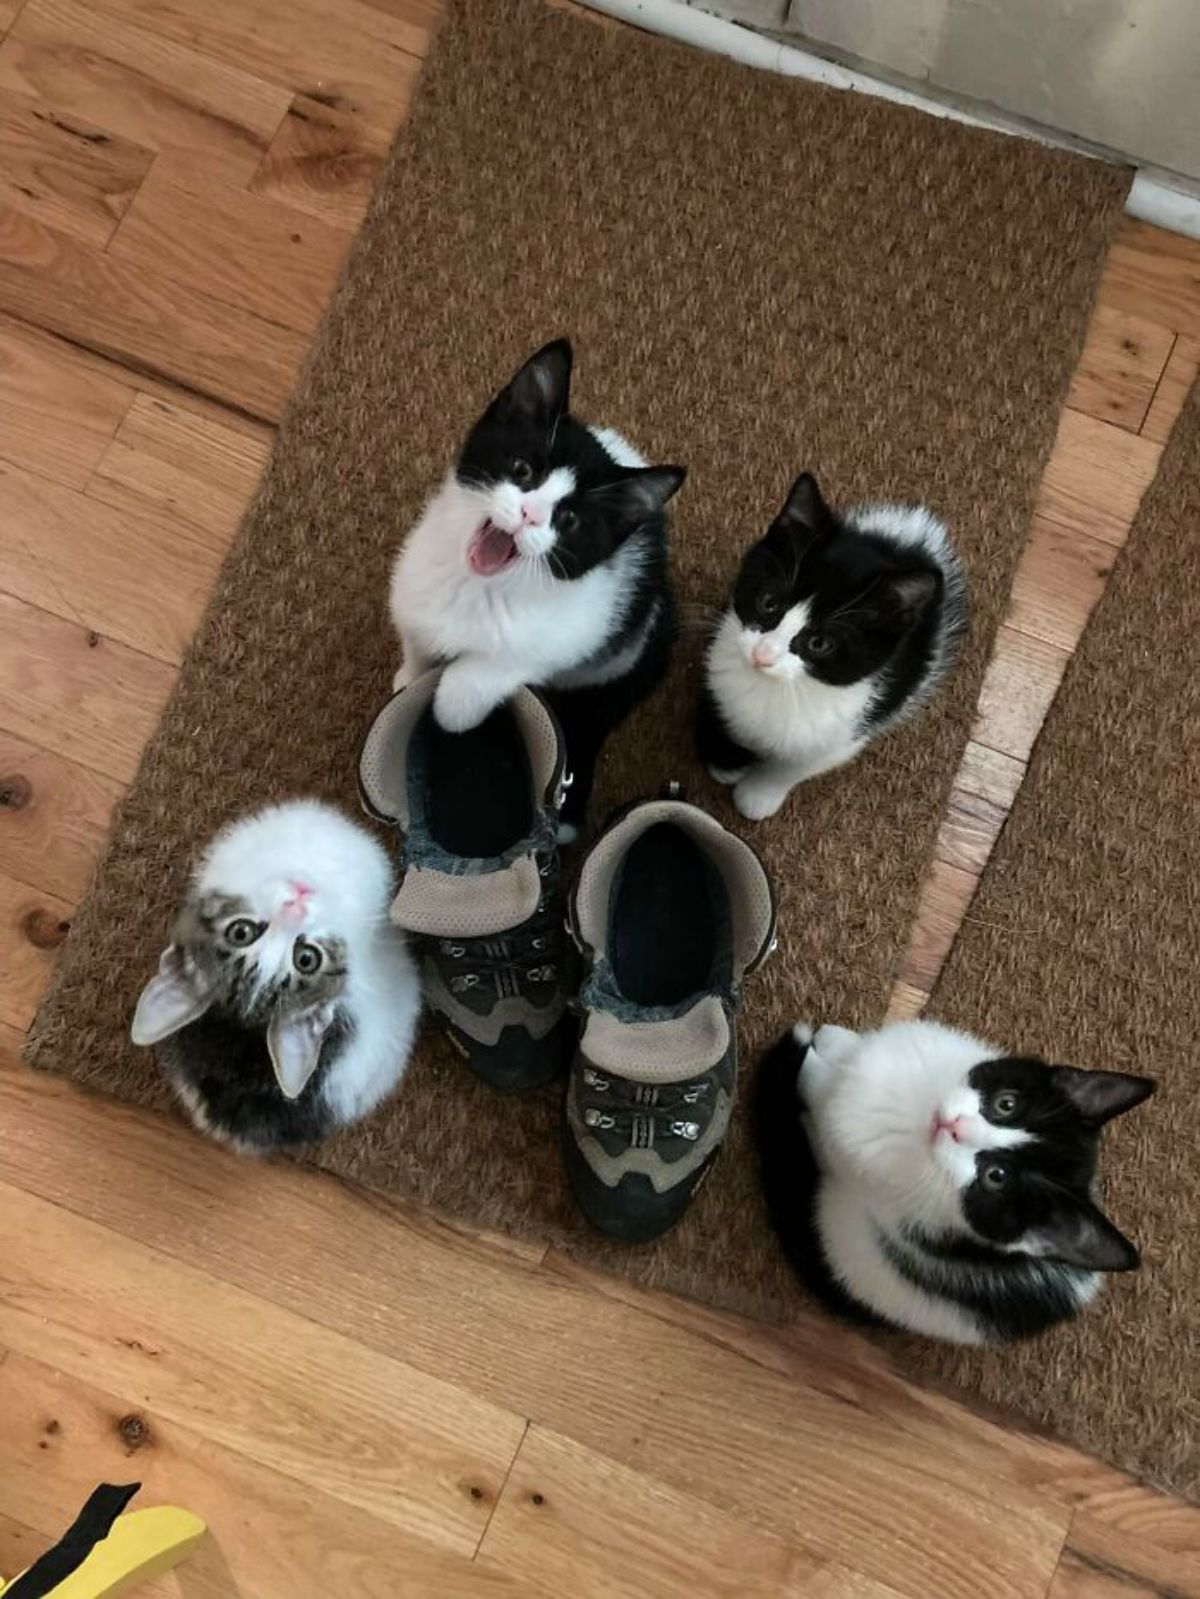 4 black grey and white tabby kittens standing around grey and black boots and looking up